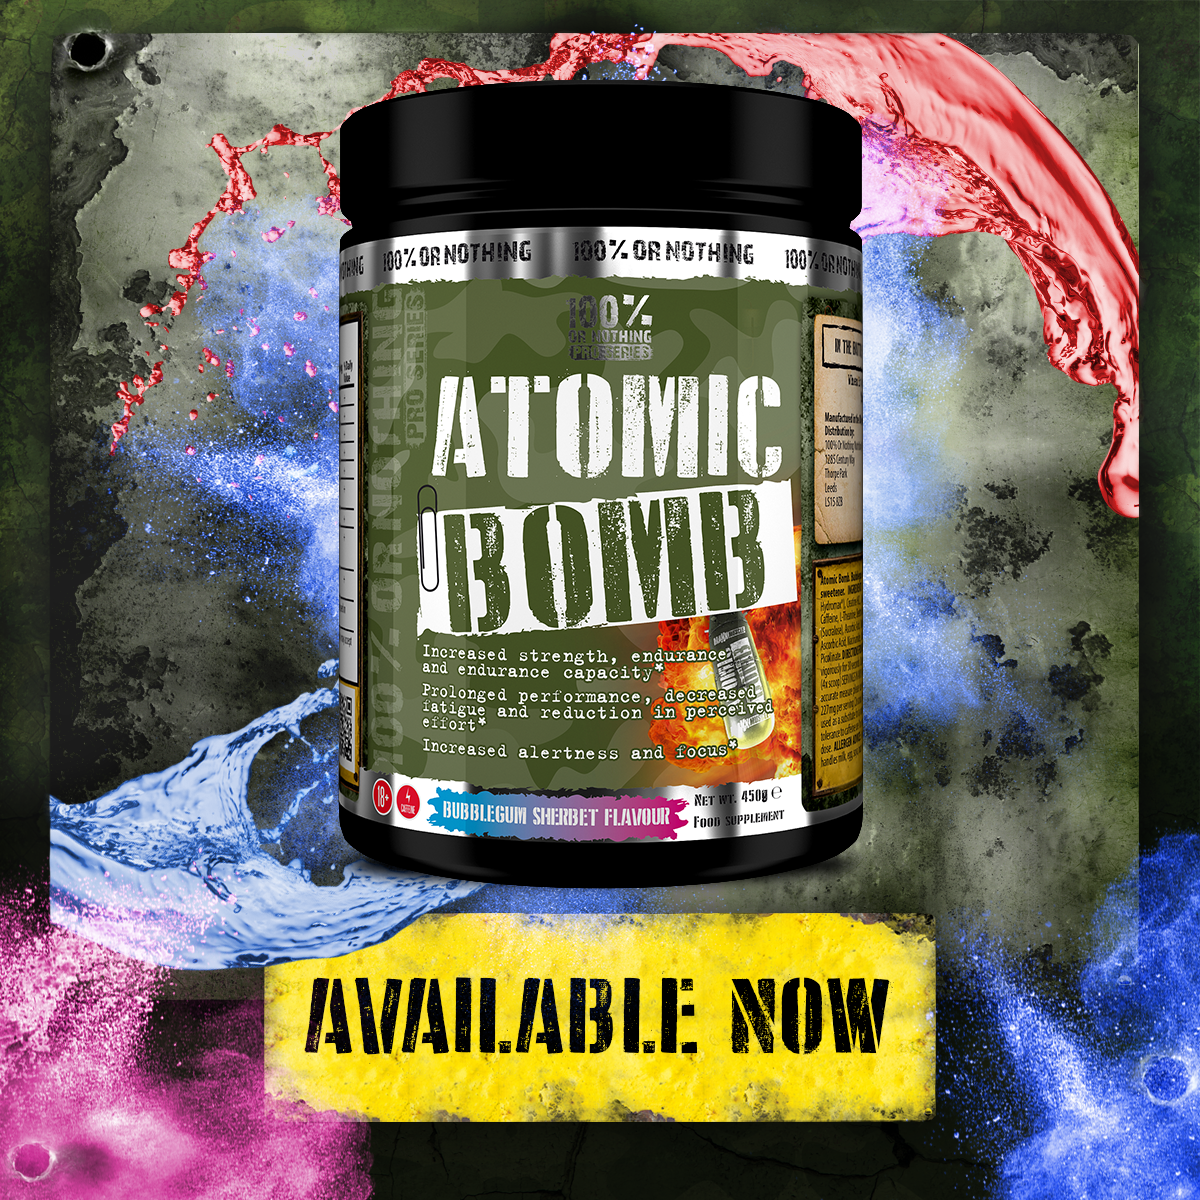 100% or Nothing - Atomic Bomb (High Strength Pre-Workout)